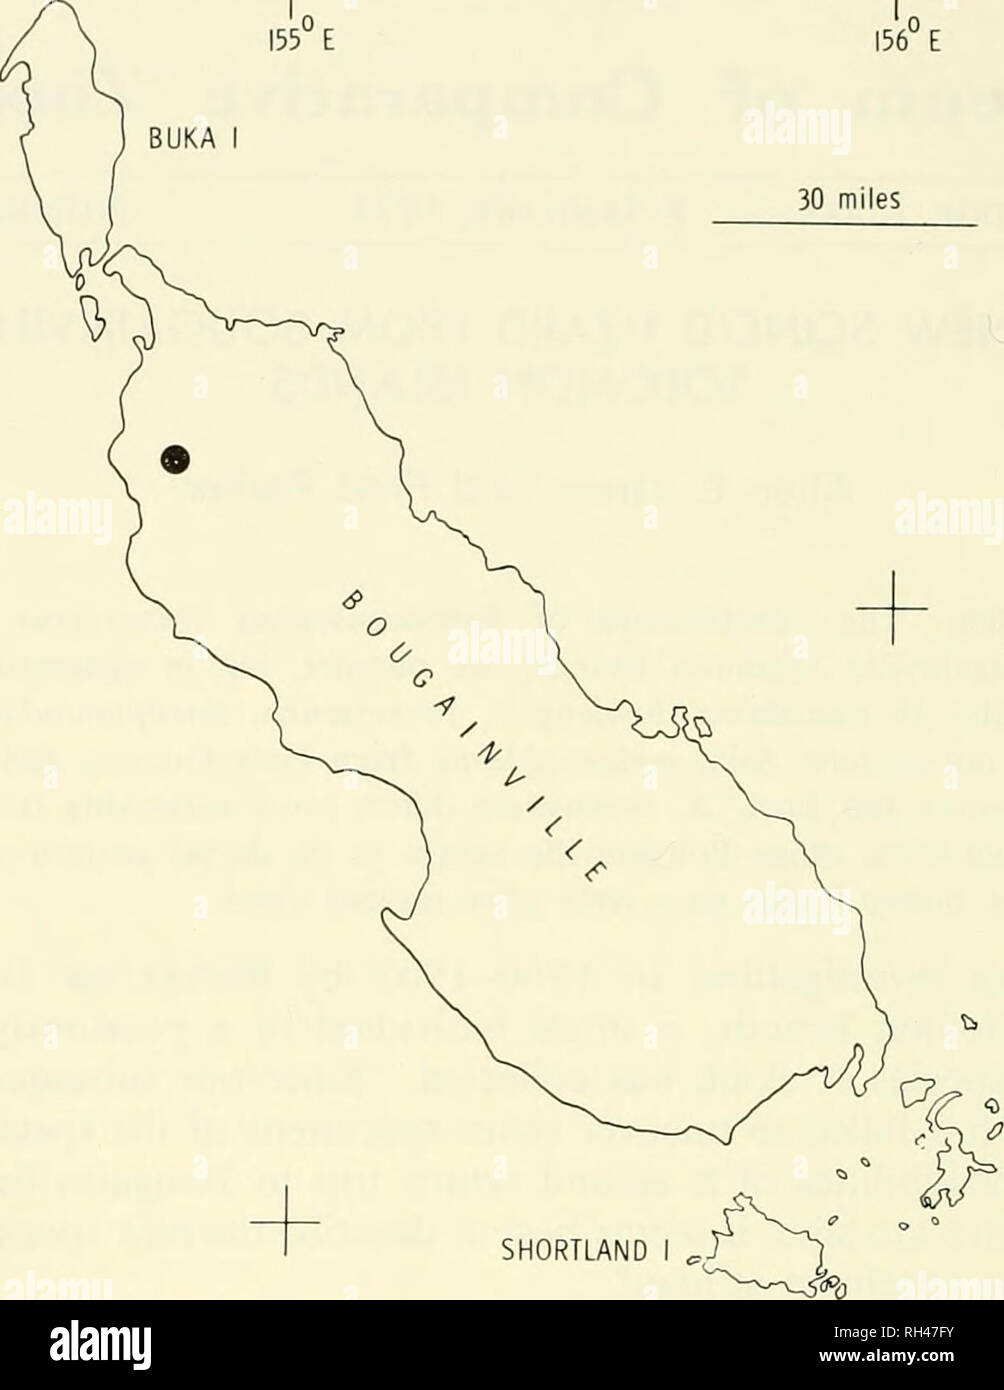 . Breviora. BREVIORA No. 364 155Â° E 56Â° E BUKA I 30 miles â 6Â°S â¢7Â°S. 6Â°S-^ I55Â°E SHORTLAND MONO I (^ FAURO 7Â°S- 156Â° E Figure 1. Map of Bougainville showing the location approximately 5 miles east of Kunua where the type and only known specimen of Spheno- morphiis transversus was collected. Diagnosis. Similar in squamation to those skinks of the genus Sphenomorphus (Table 1 ) that have a single anterior loreal, the frontal in contact with 3 or more of the 5 or more supraoculars, frontoparietals and interparietal distinct, no nuchals or trans- versely enlarged scales in the two verteb Stock Photo